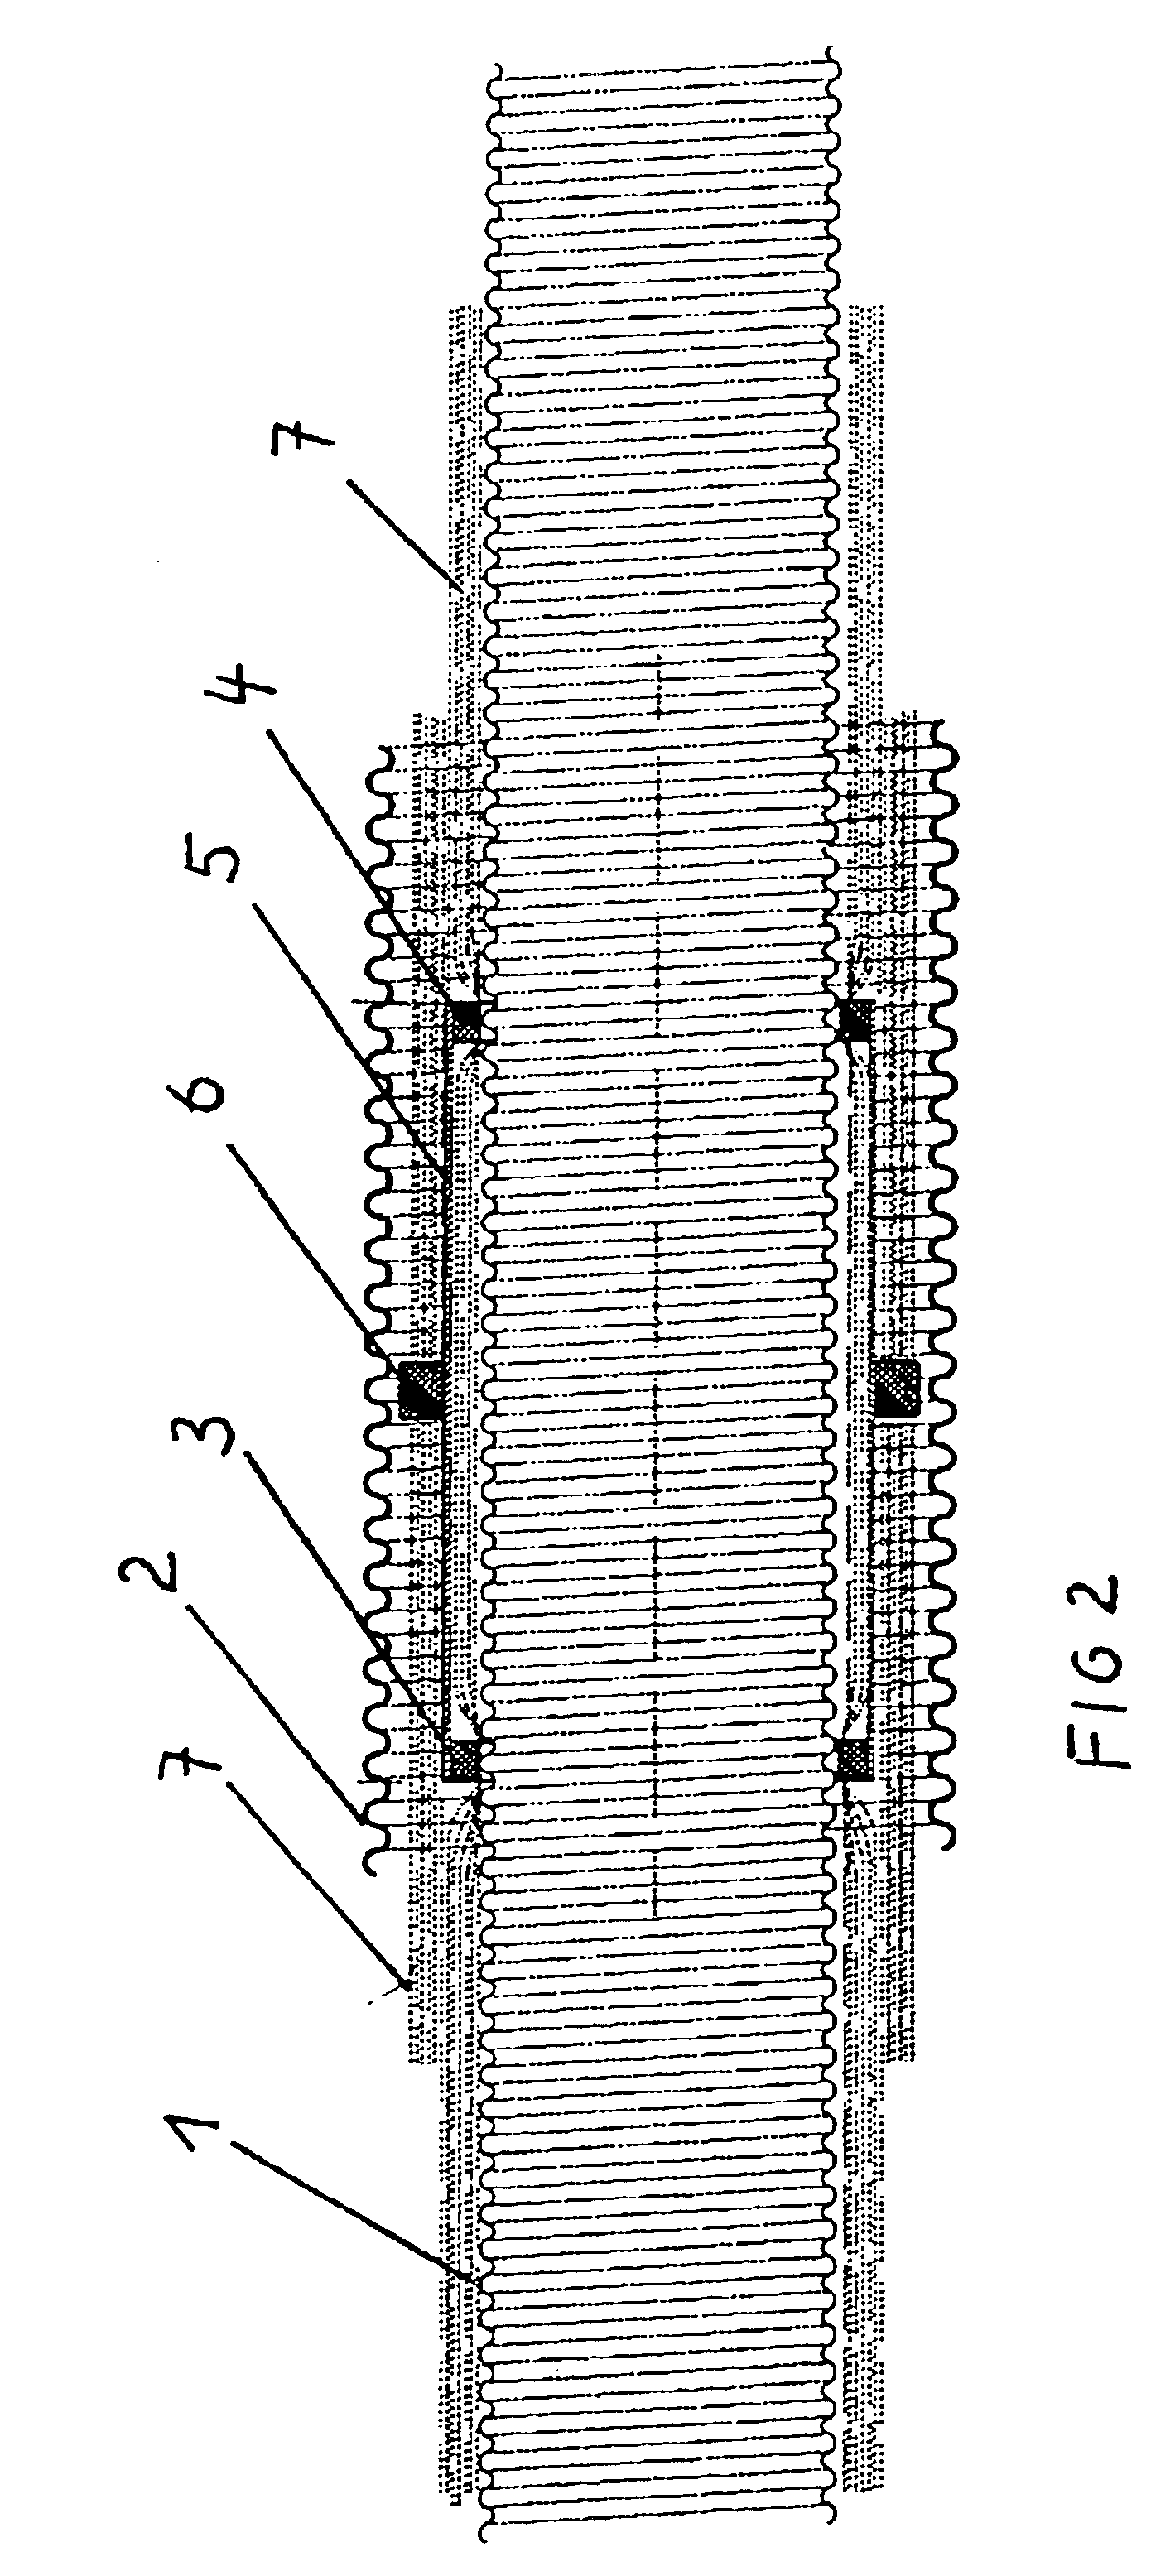 Spacer for a long substrate